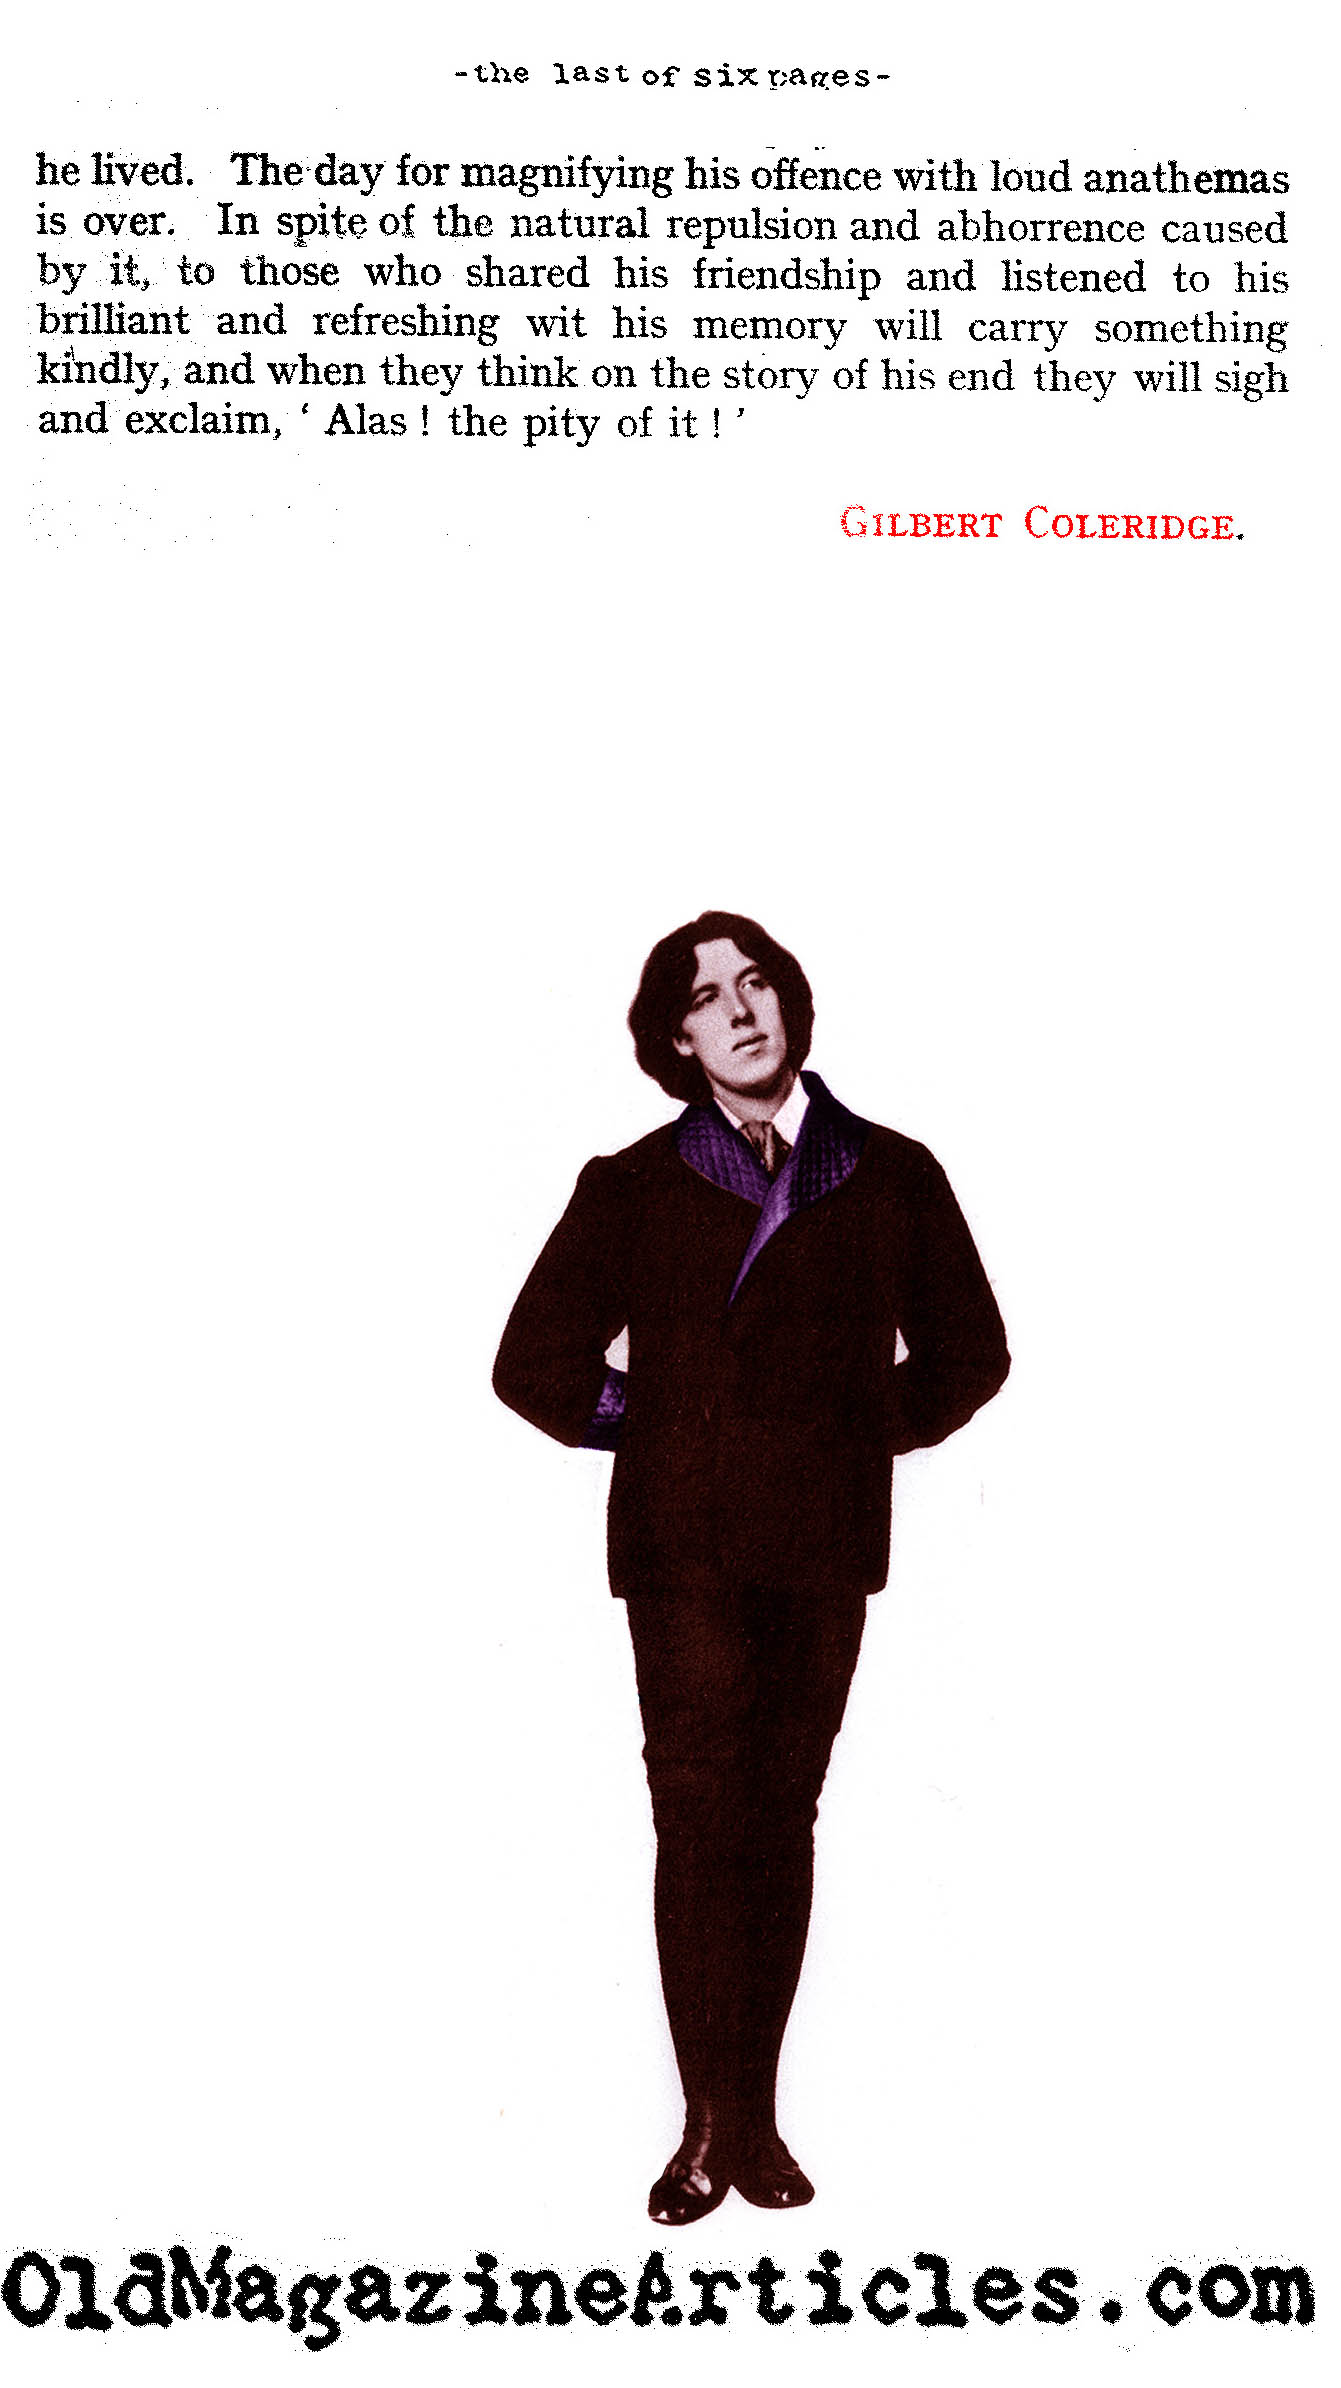 A Look at Oscar Wilde (The Nineteenth Century, 1922)